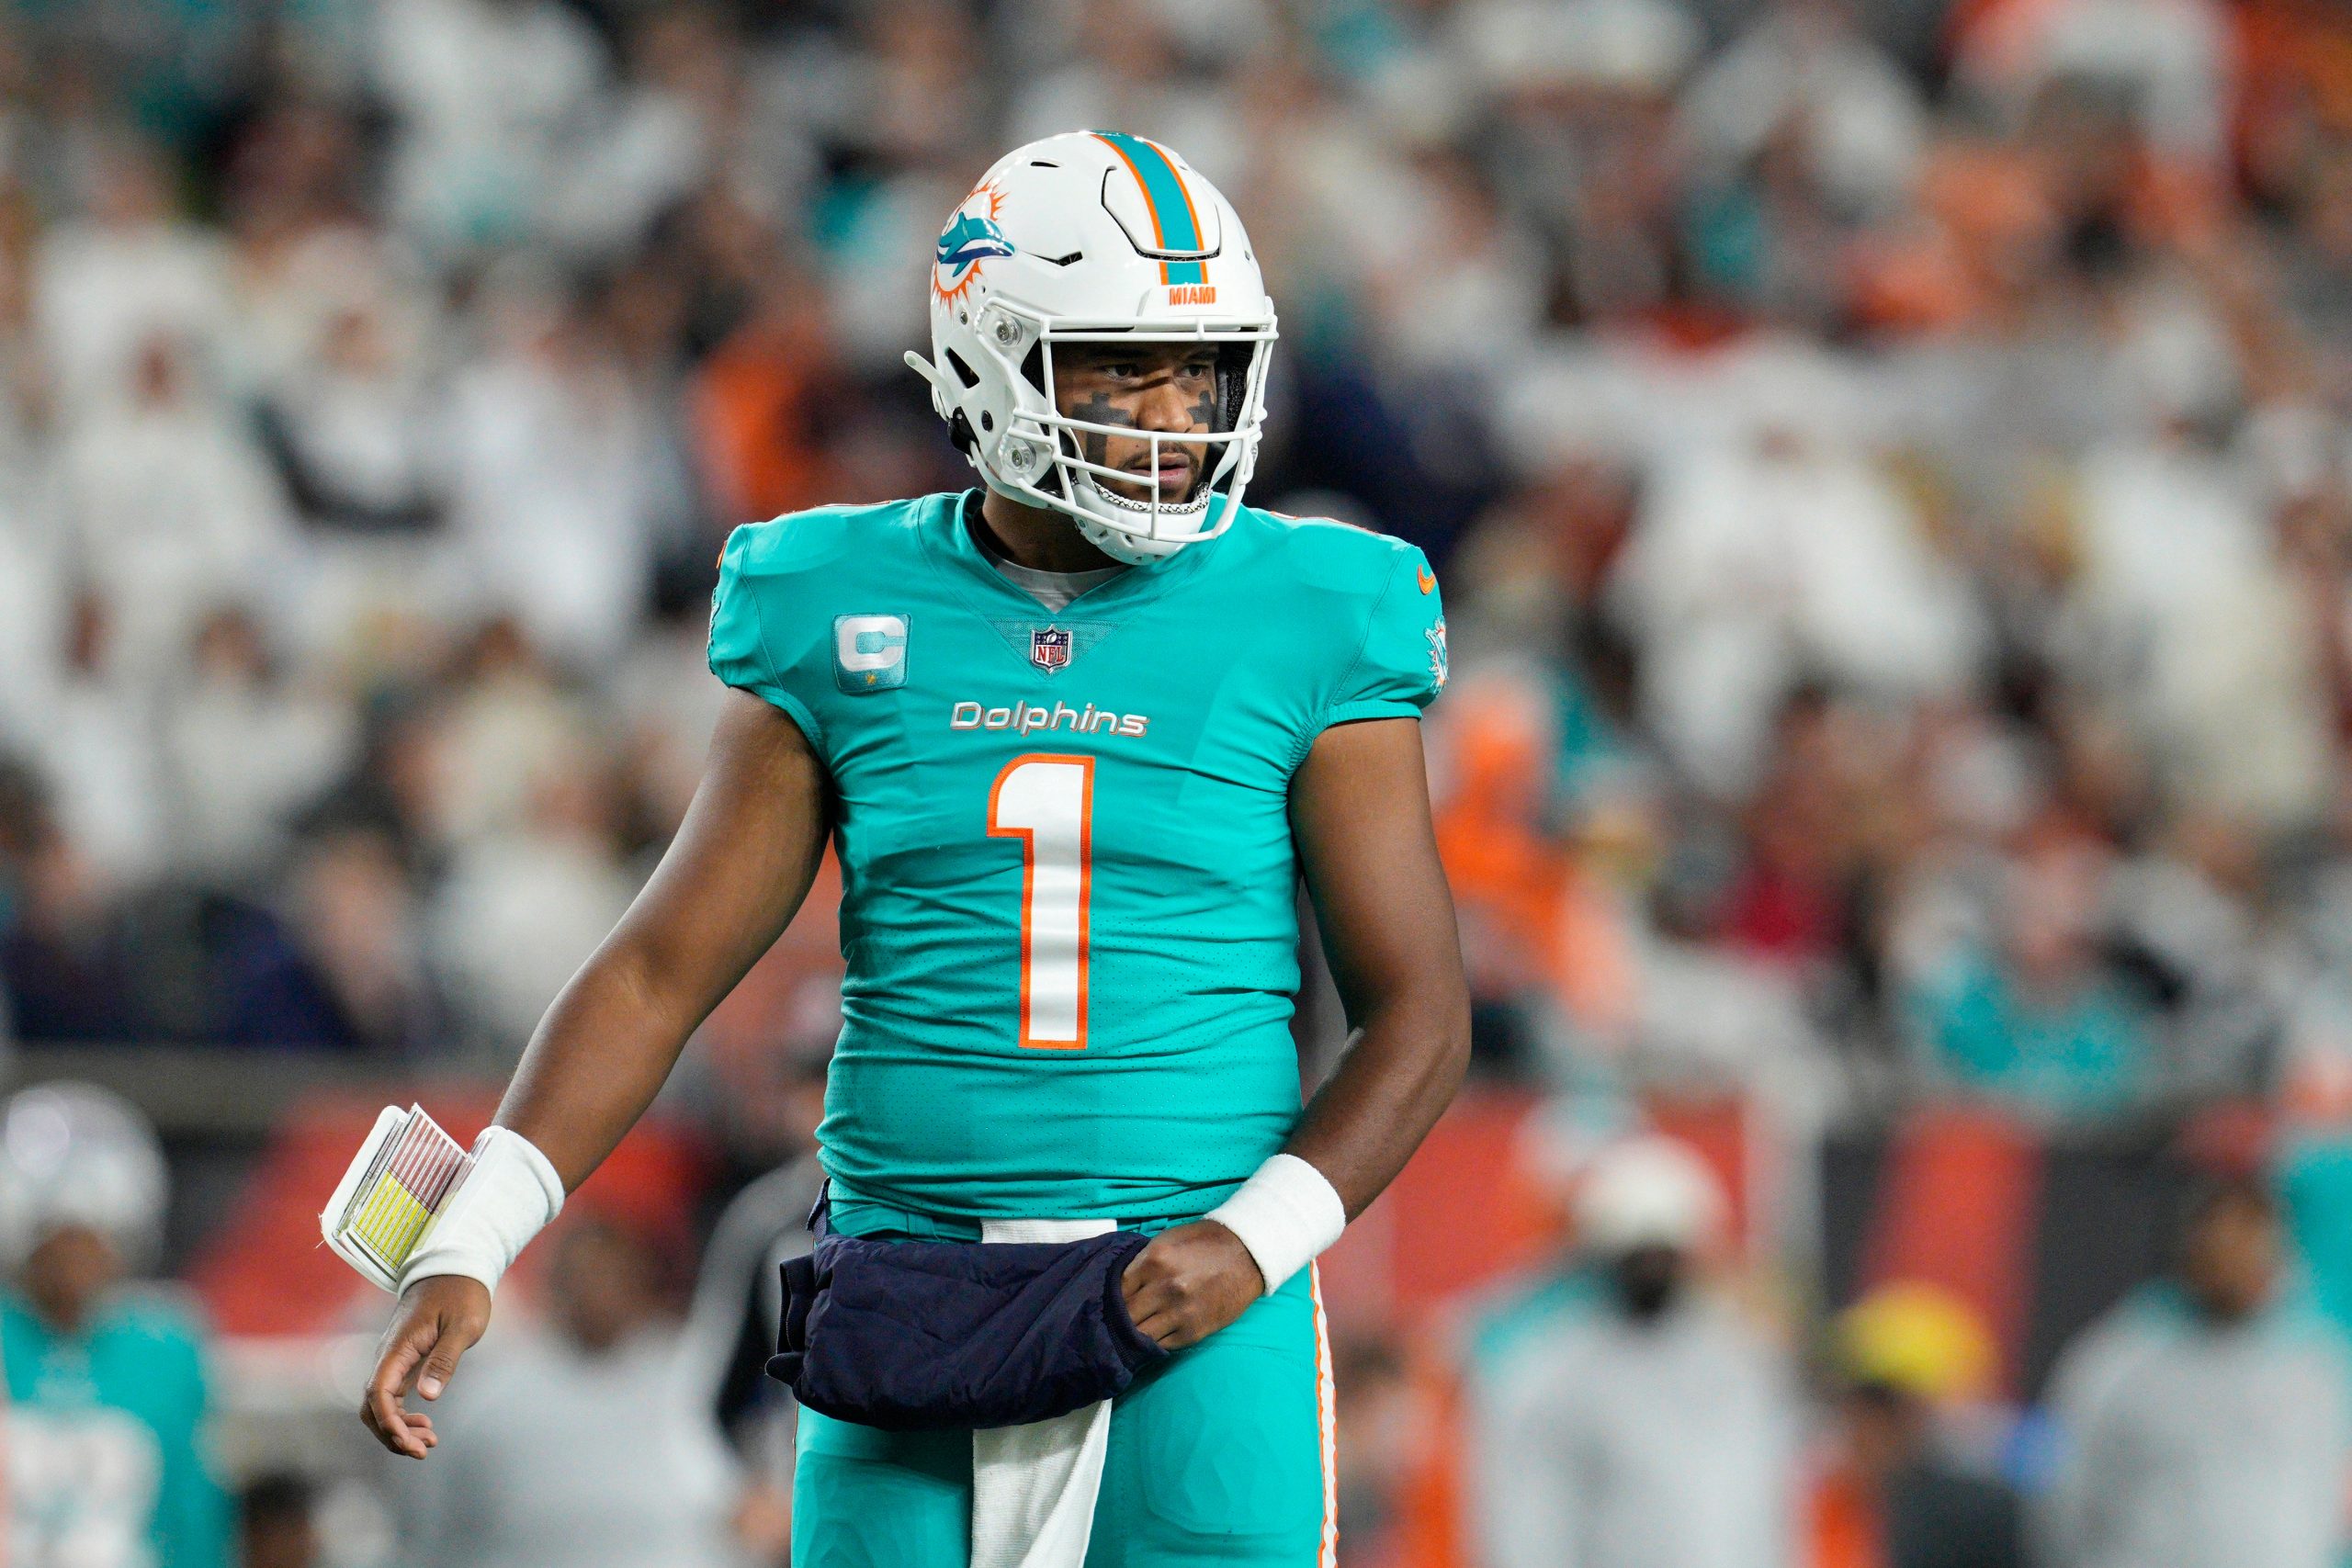 Tua Tagovailoa thanks fans, Miami Dolphins for ‘support and care’ after head injury vs Cincinnati